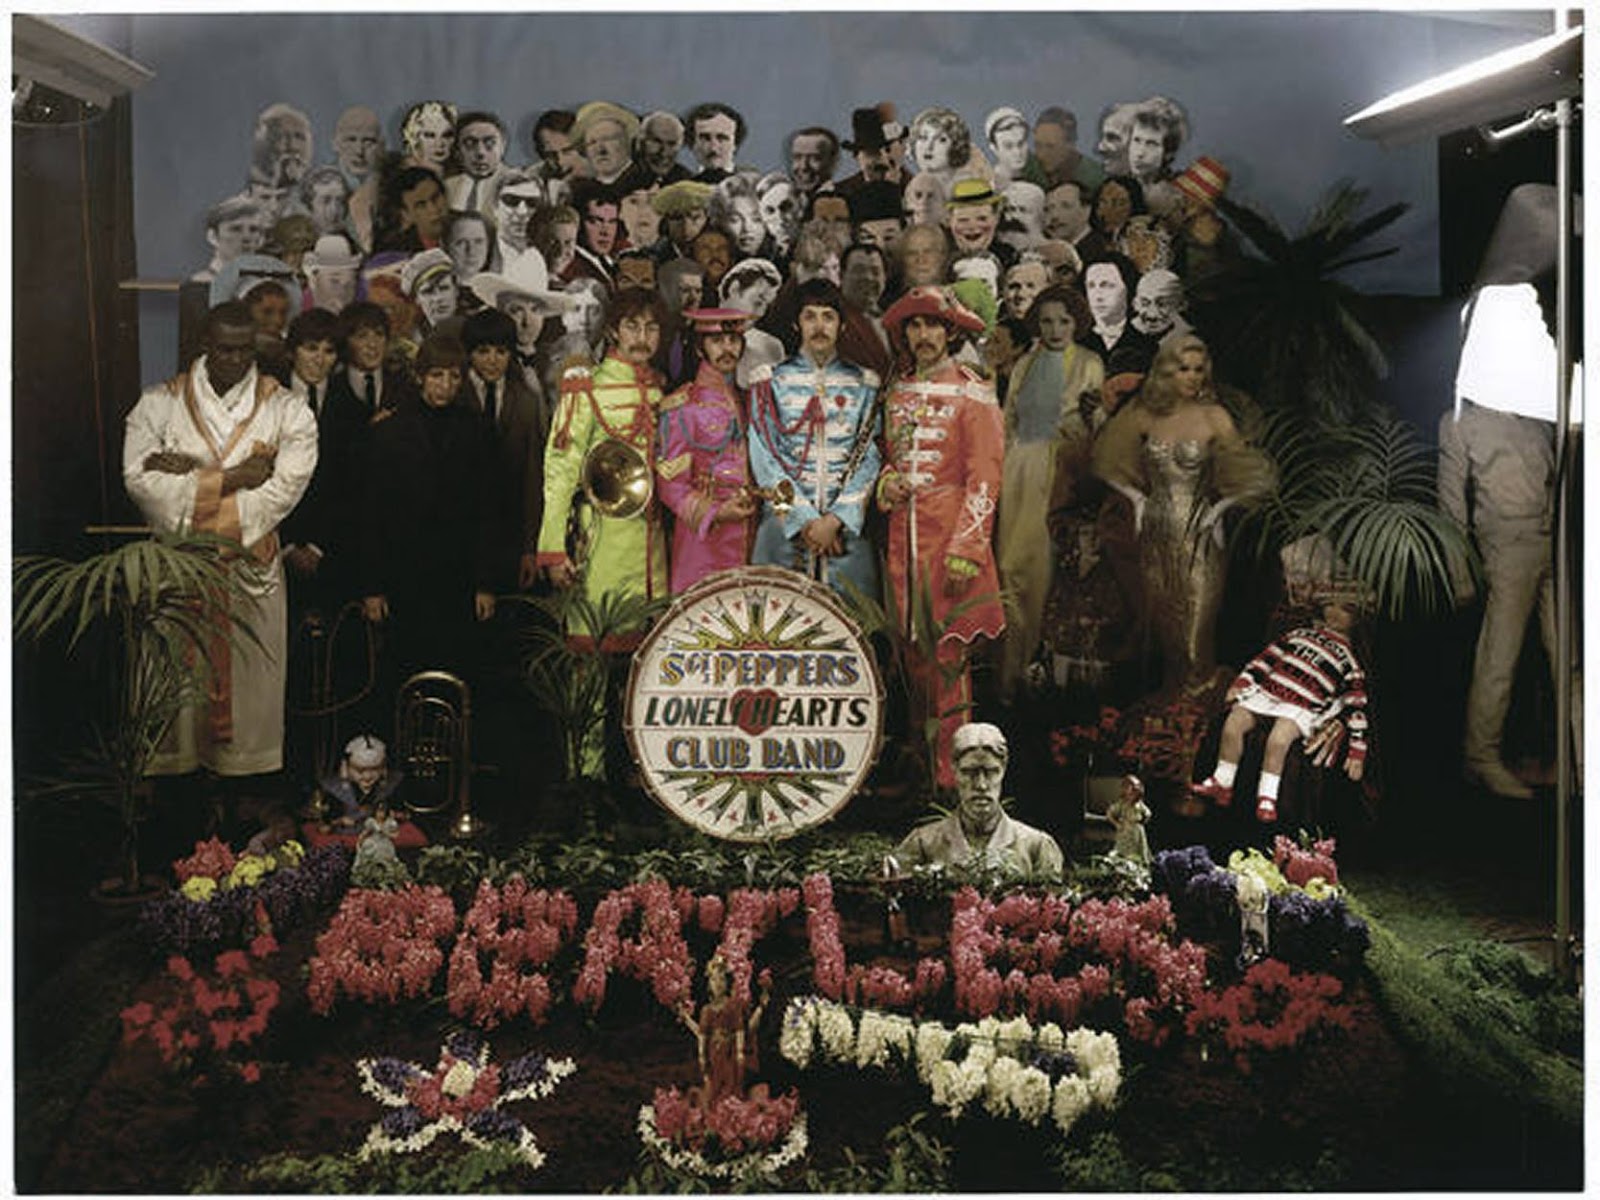 Beatles sgt peppers lonely hearts club. Cover Sgt. Pepper`s Lonely Hearts Club Band (1967). Sgt Pepper s Lonely Hearts Club Band. Sgt. Pepper's Lonely Hearts Club Band Битлз. The Beatles Sgt Pepper оркестр 1967.